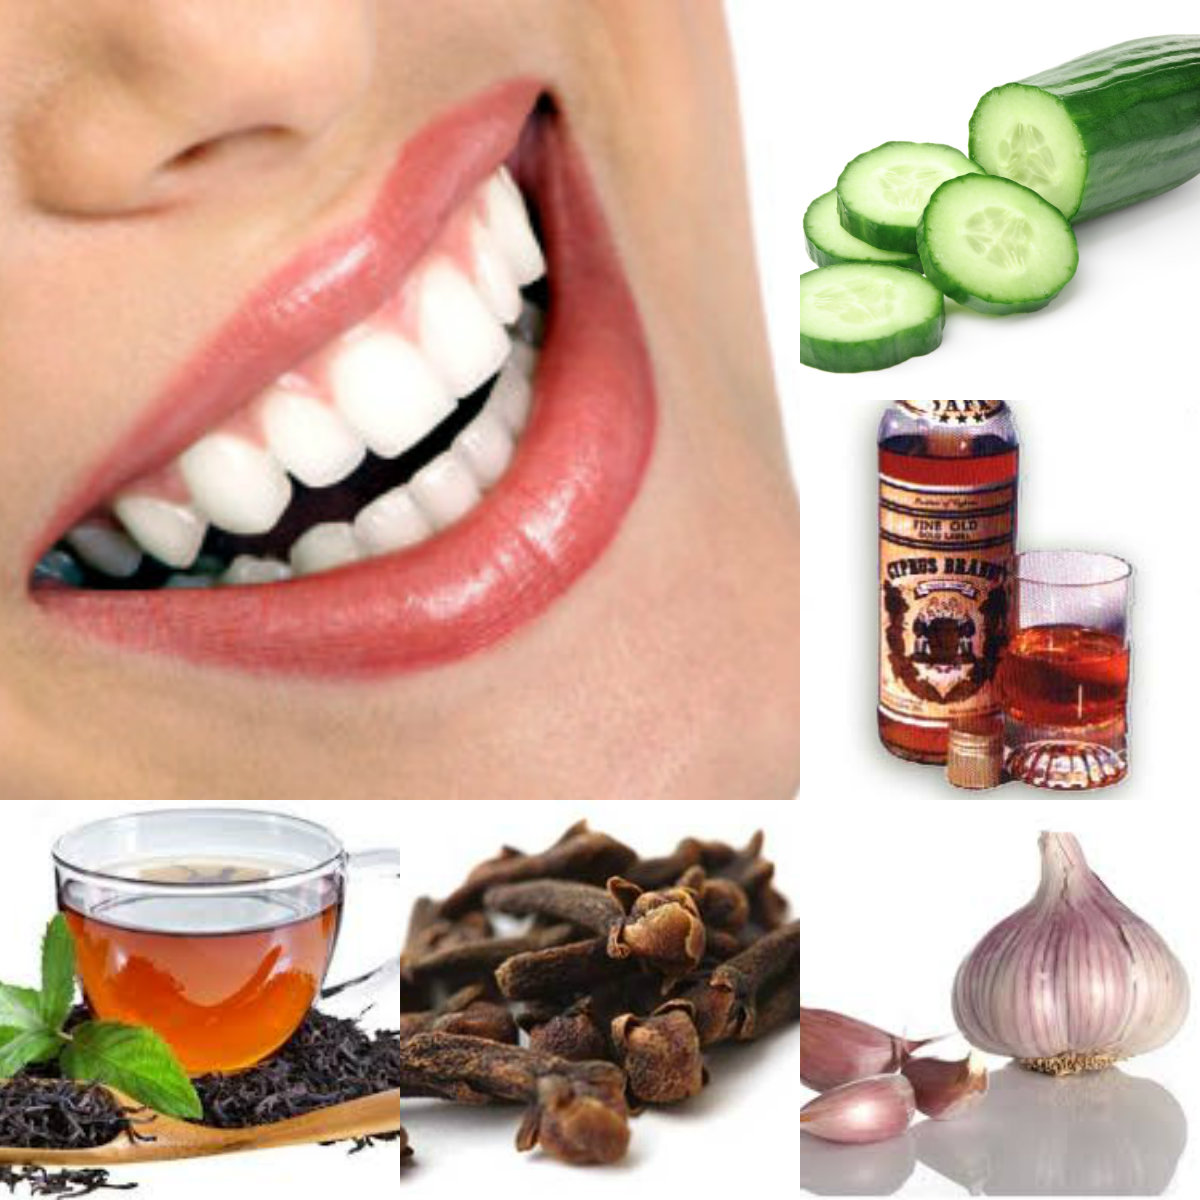 home remedies for toothache